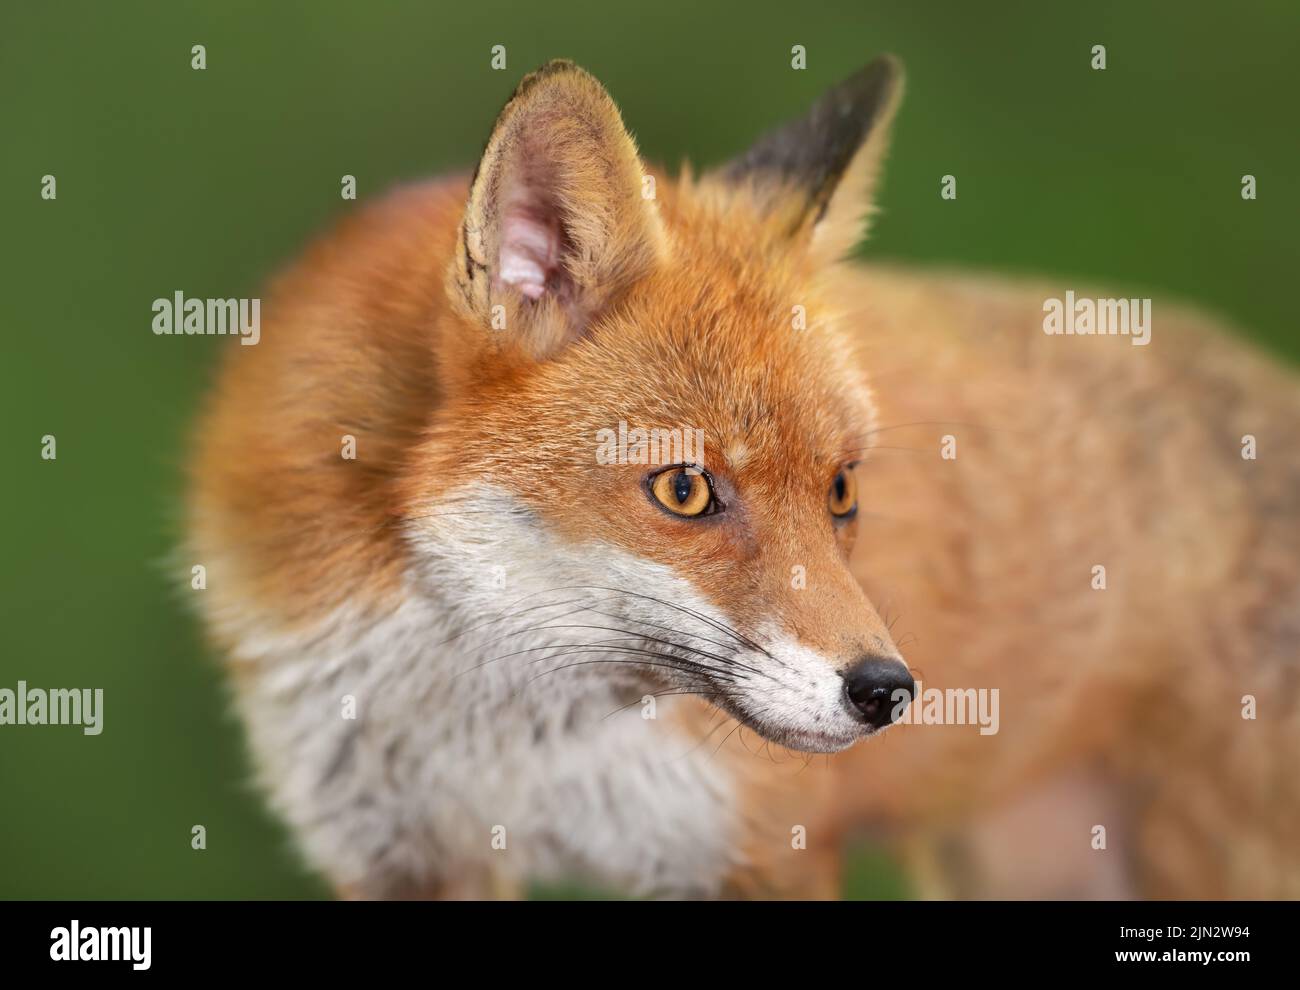 Portrait of a Red fox (Vulpes vulpes) against green background, UK. Stock Photo